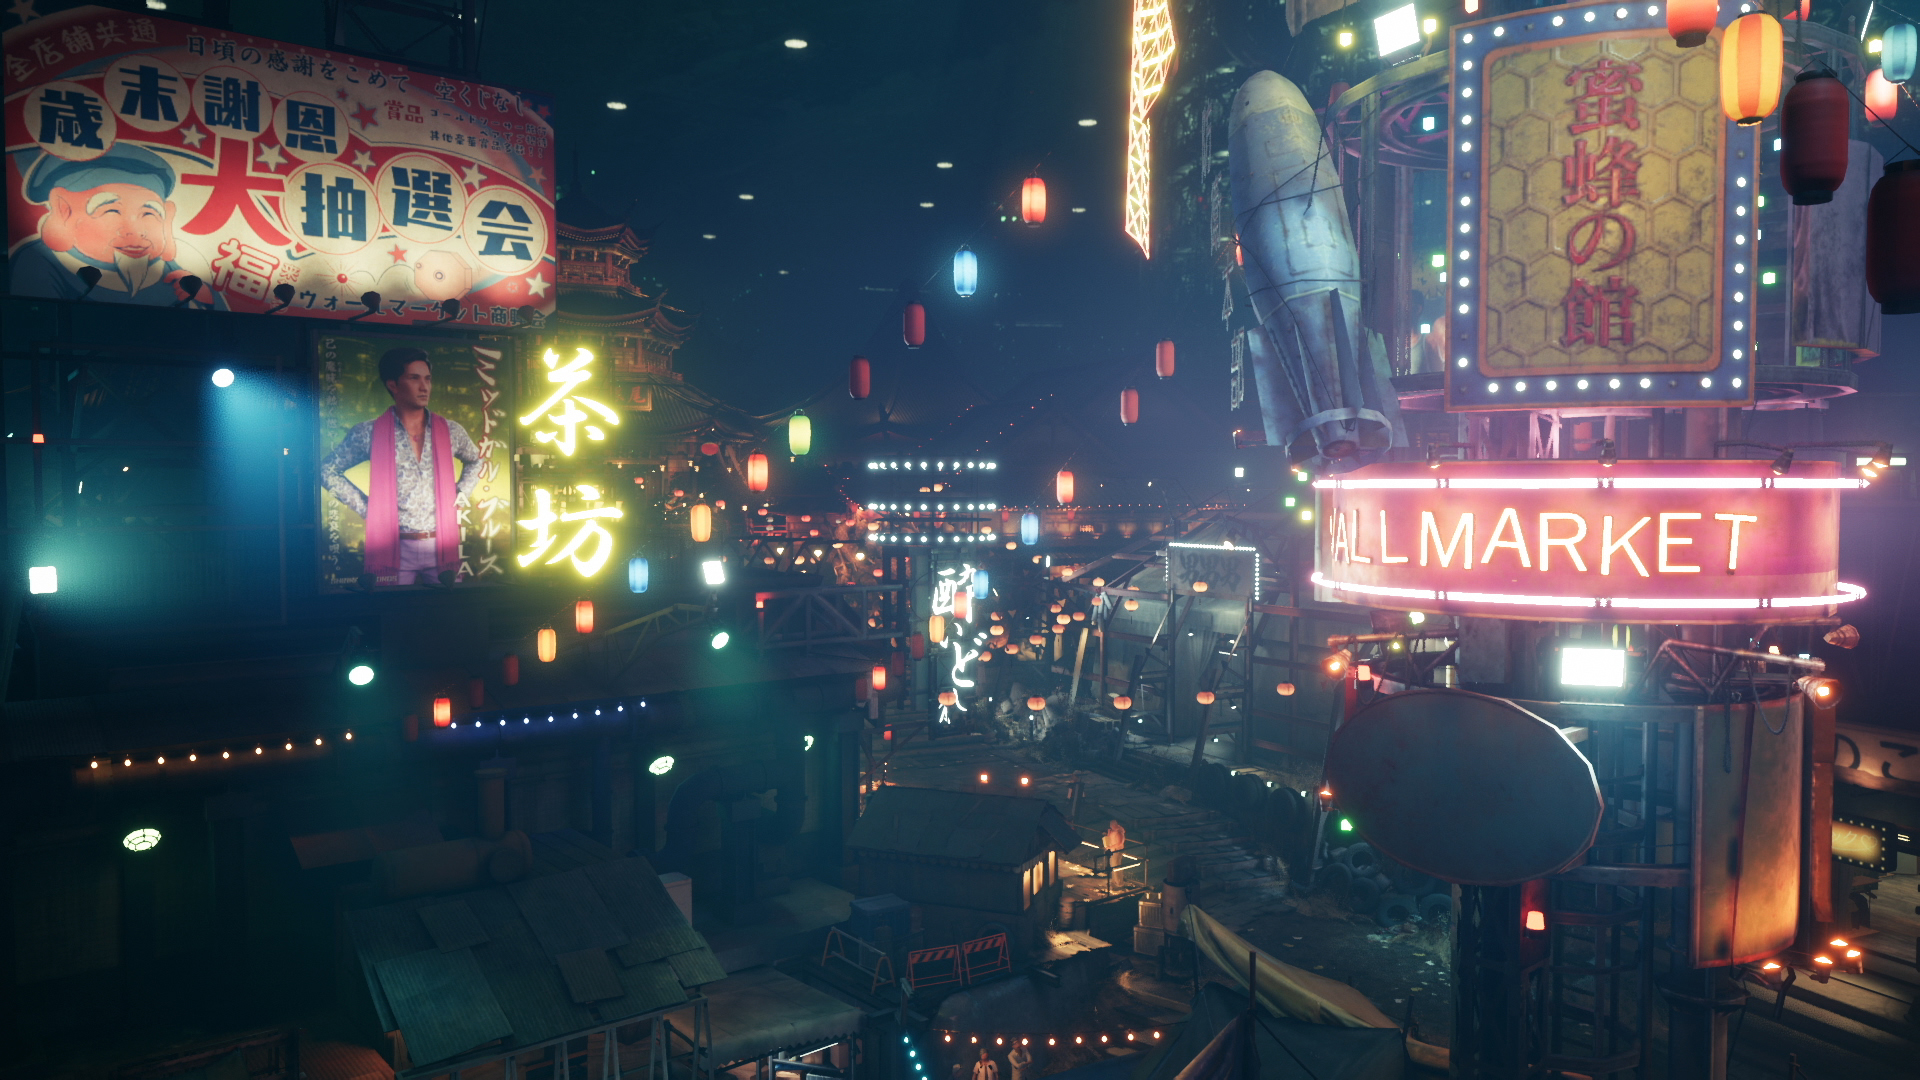 Final Fantasy 7 Remake review: thrilling, thoughtful take on a